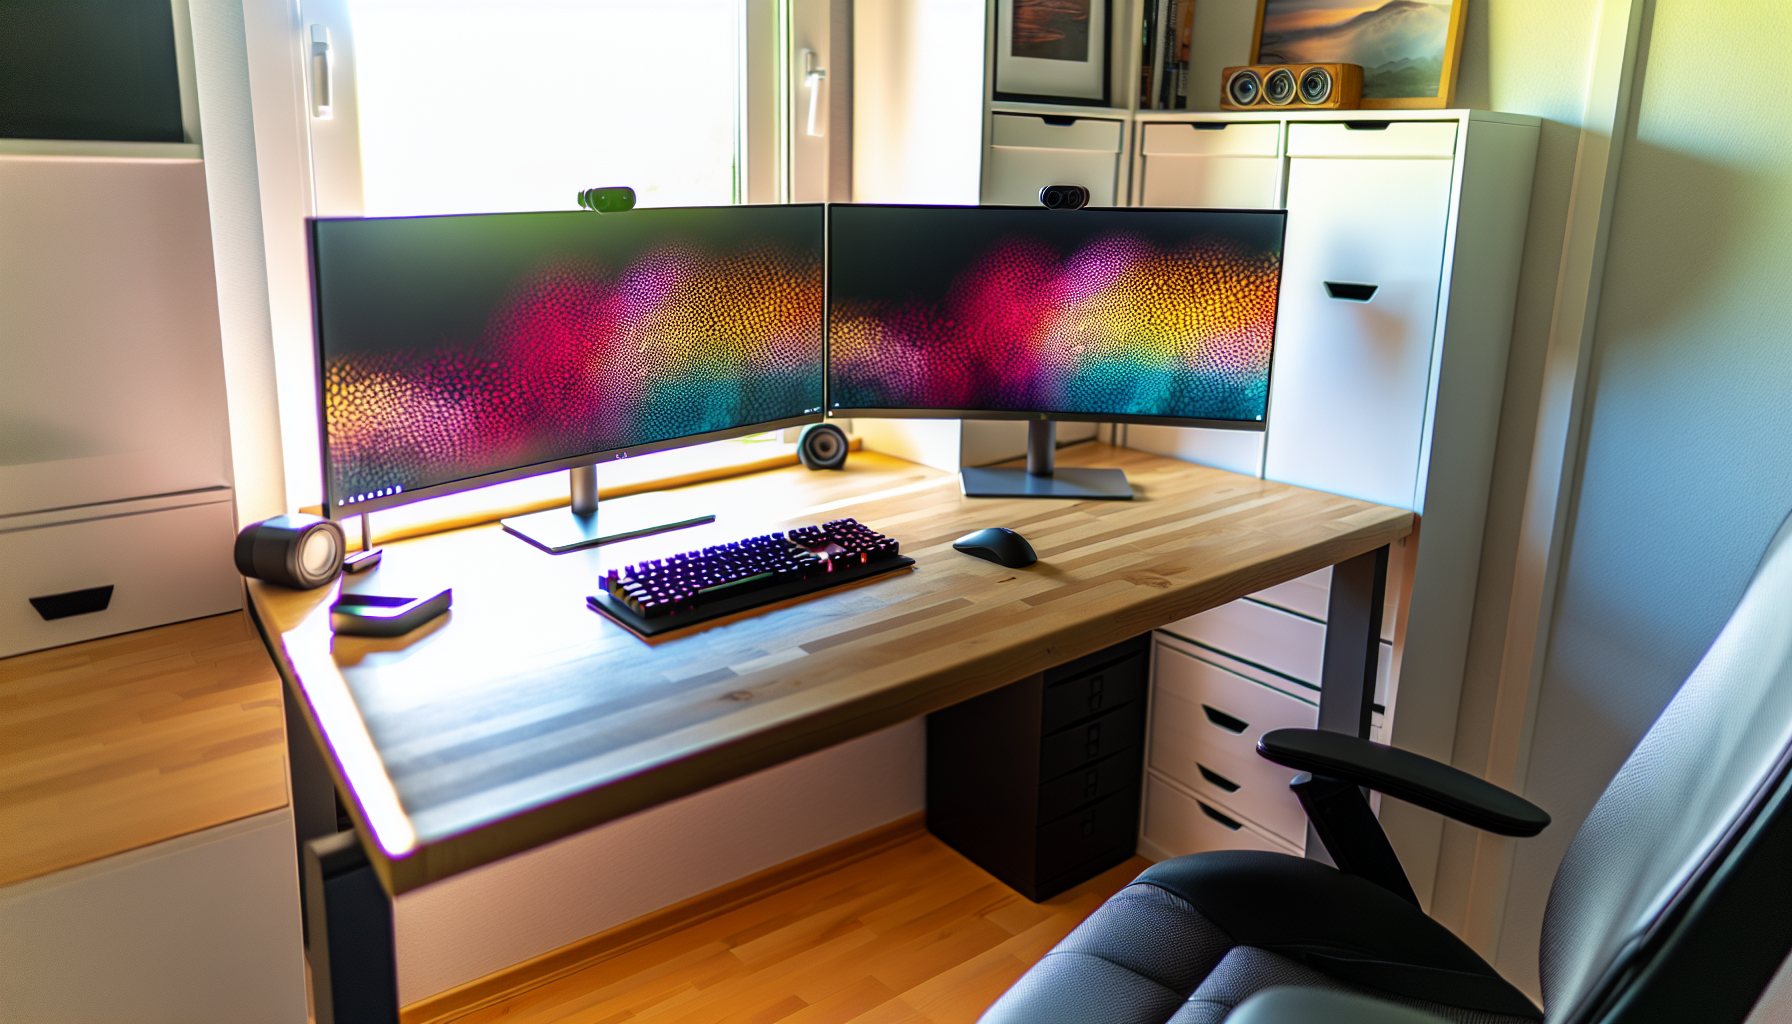 Home office desk with dual monitor setup, wireless mouse, and ergonomic keyboard